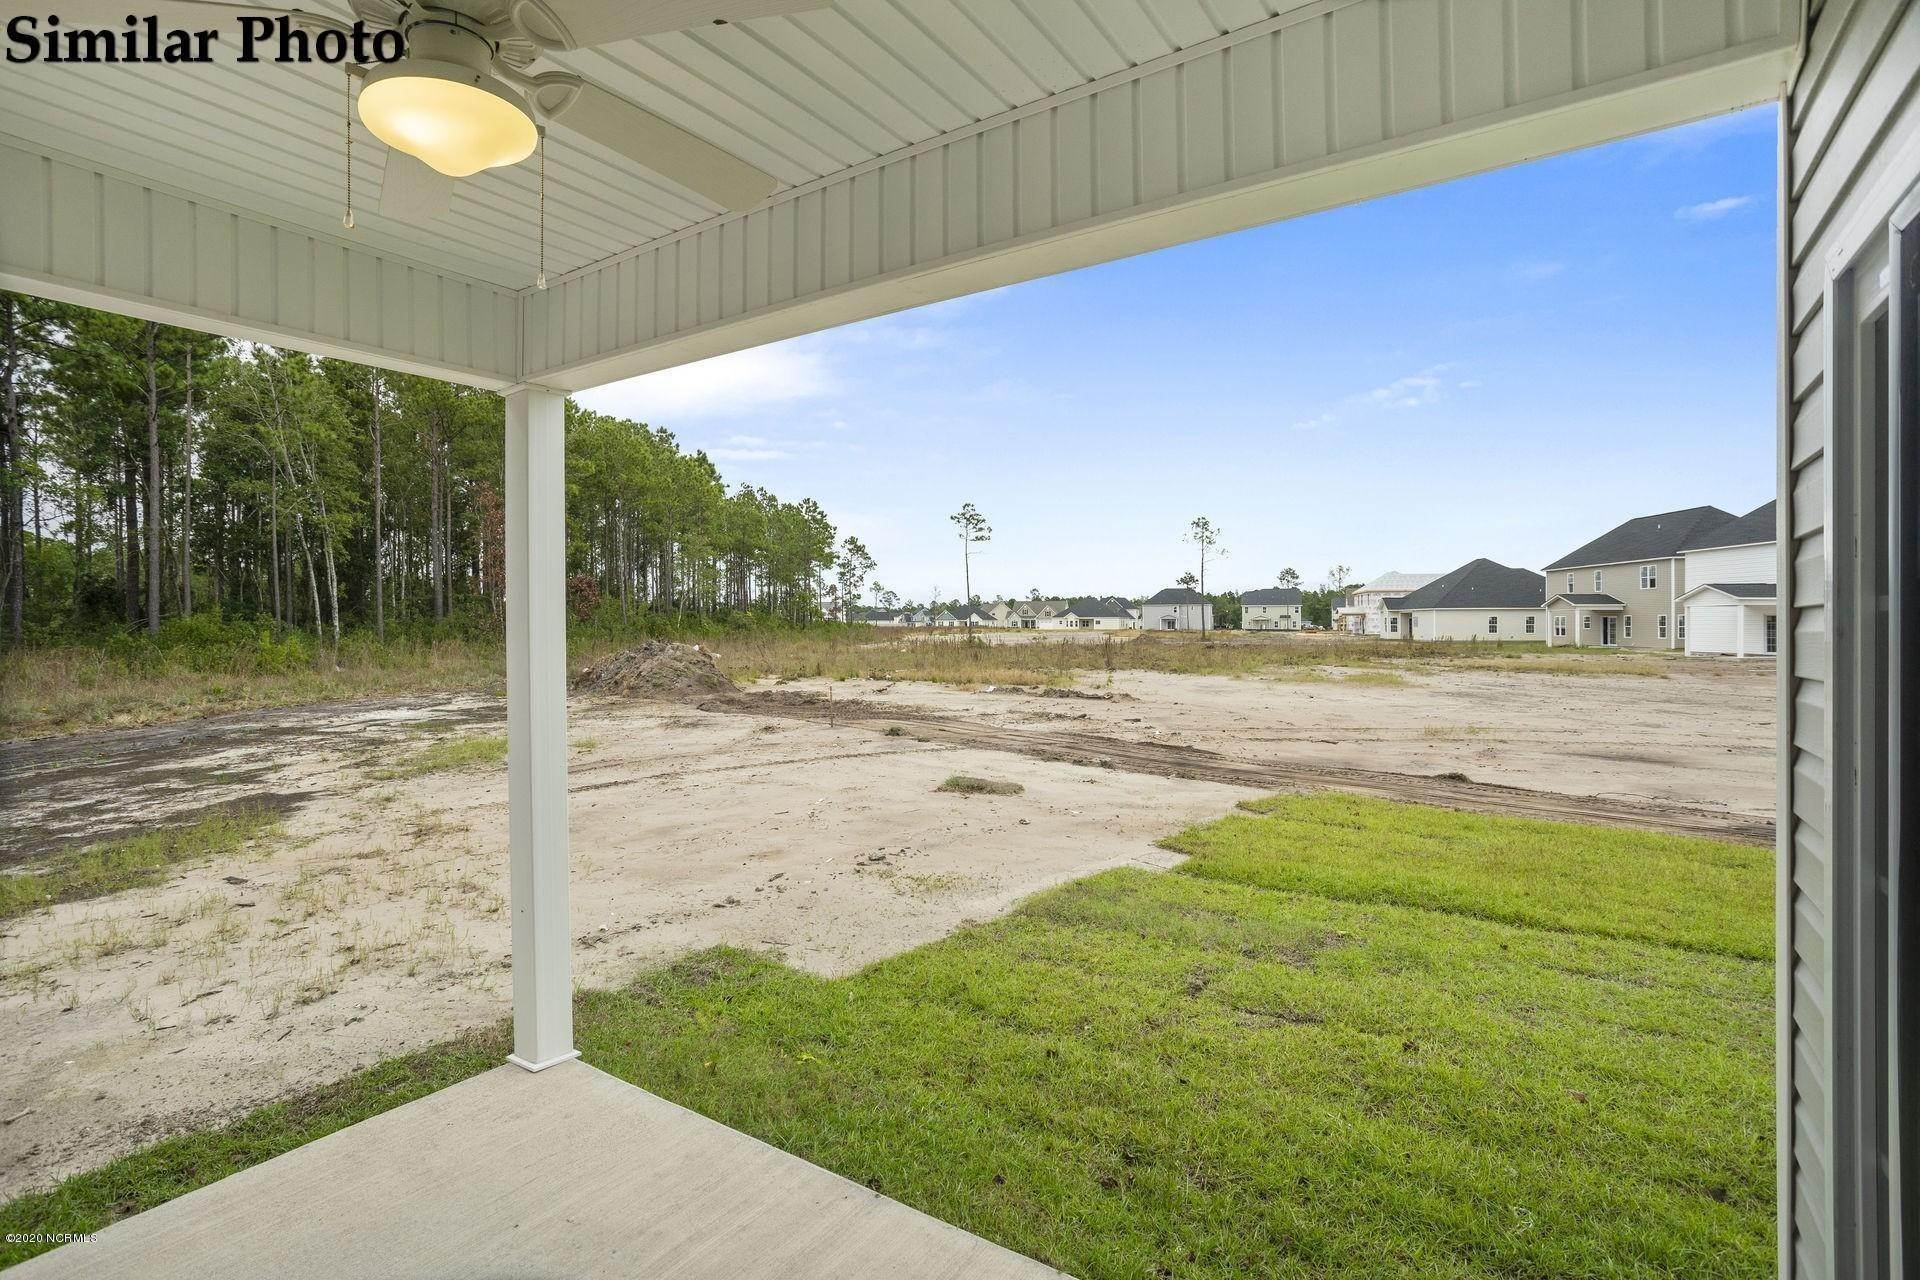 44. Single Family for Sale at Rocky Point, NC 28457